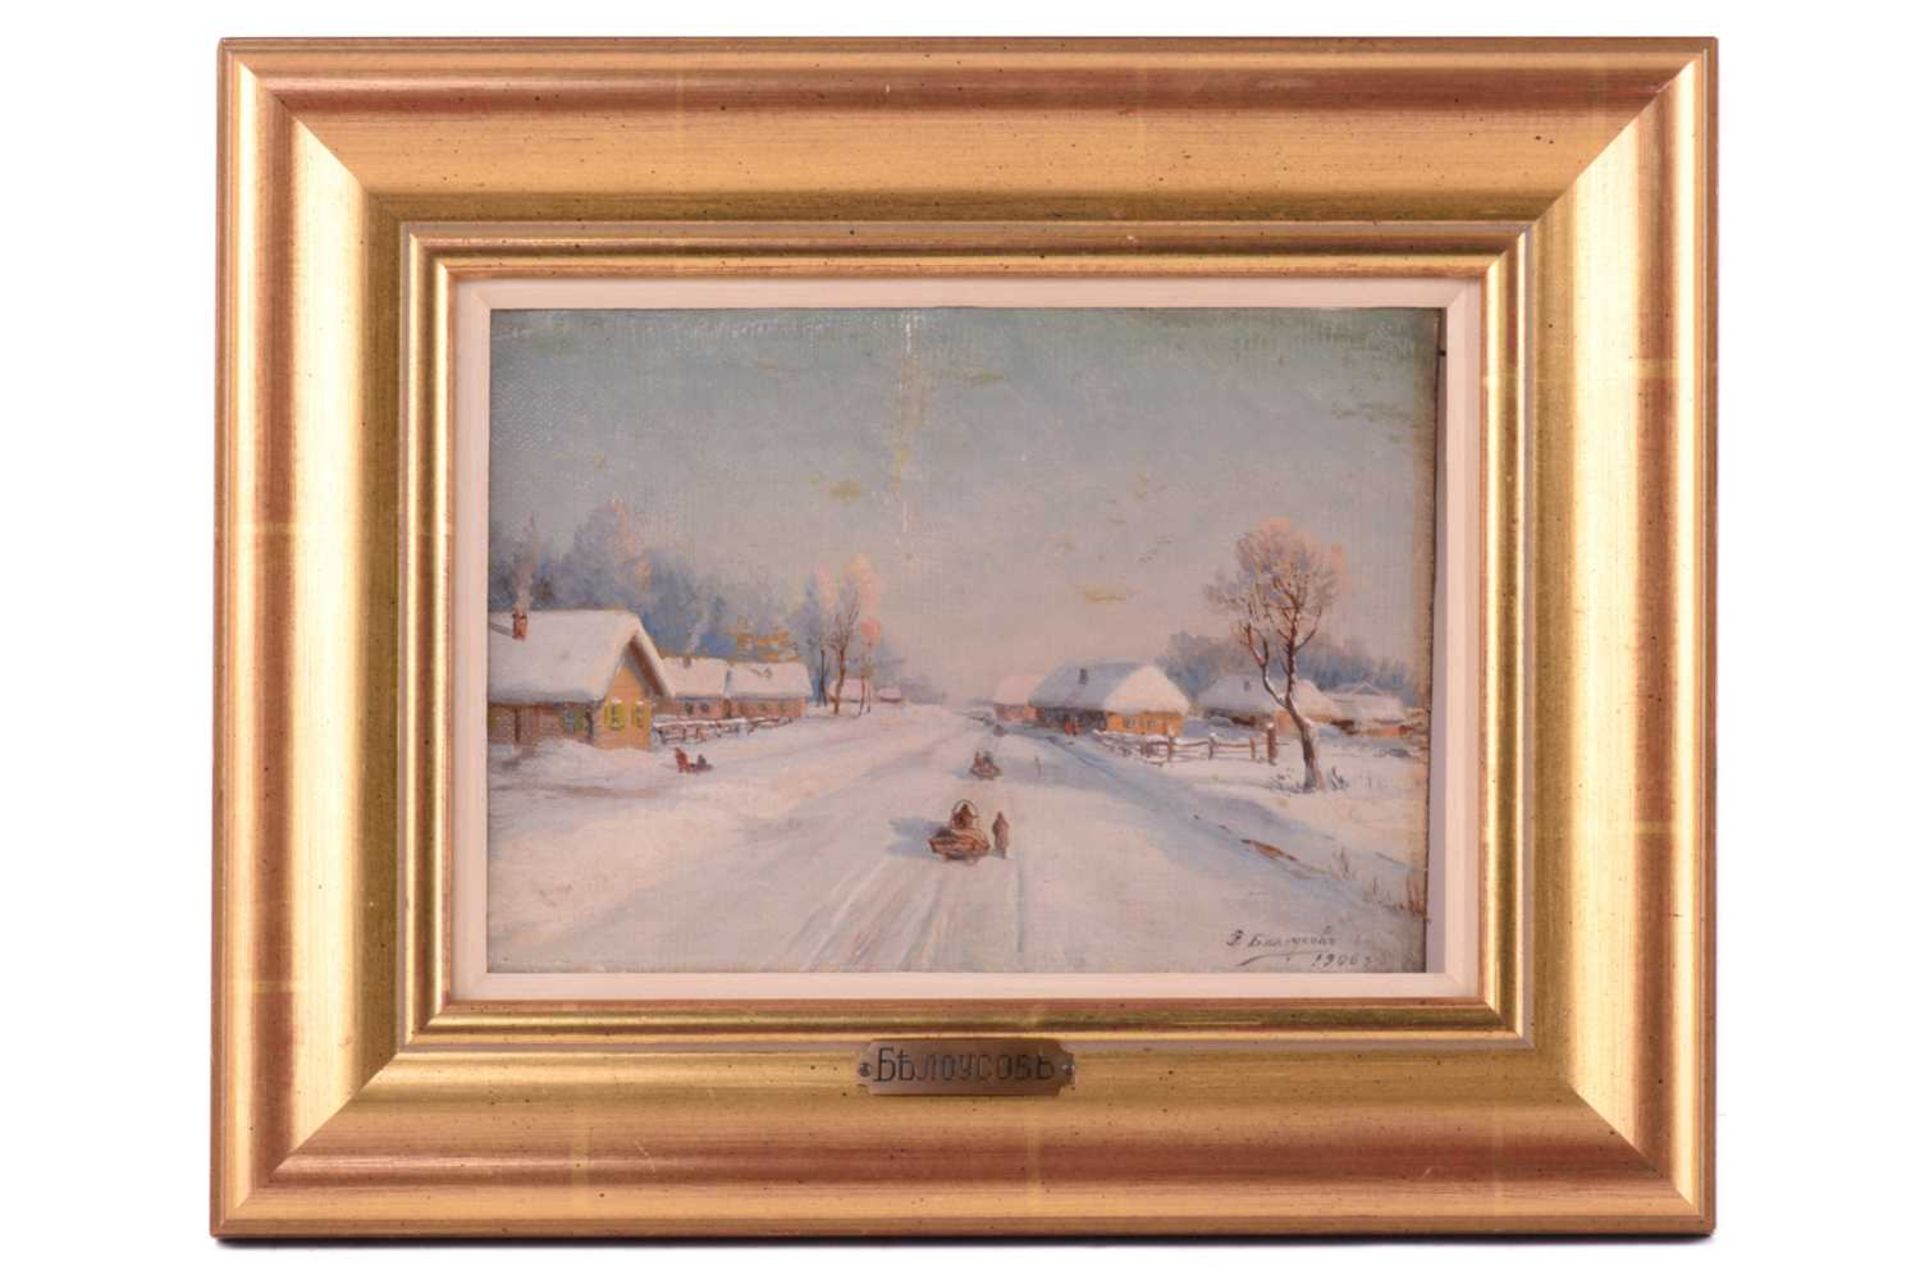 Fedor Vassilievich Belousov (1885 - 1939), A Winter Village Scene, signed and dated 1906, oil on